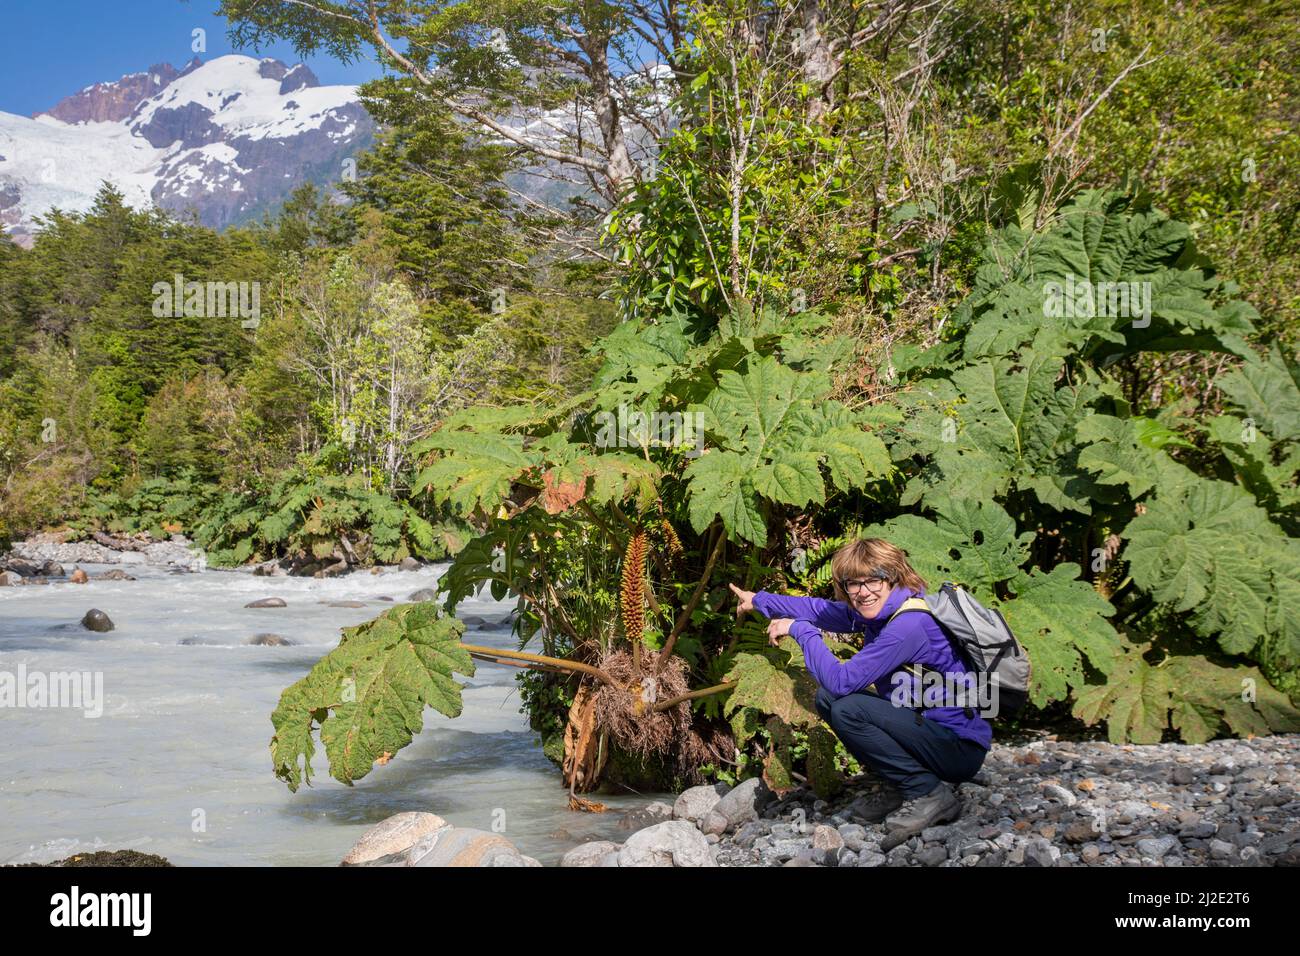 ChIle, 27-01-2020, Nalca plants with huge leaves along a river in Corcovado national park in Patagonia along the Carretera Austral. Stock Photo